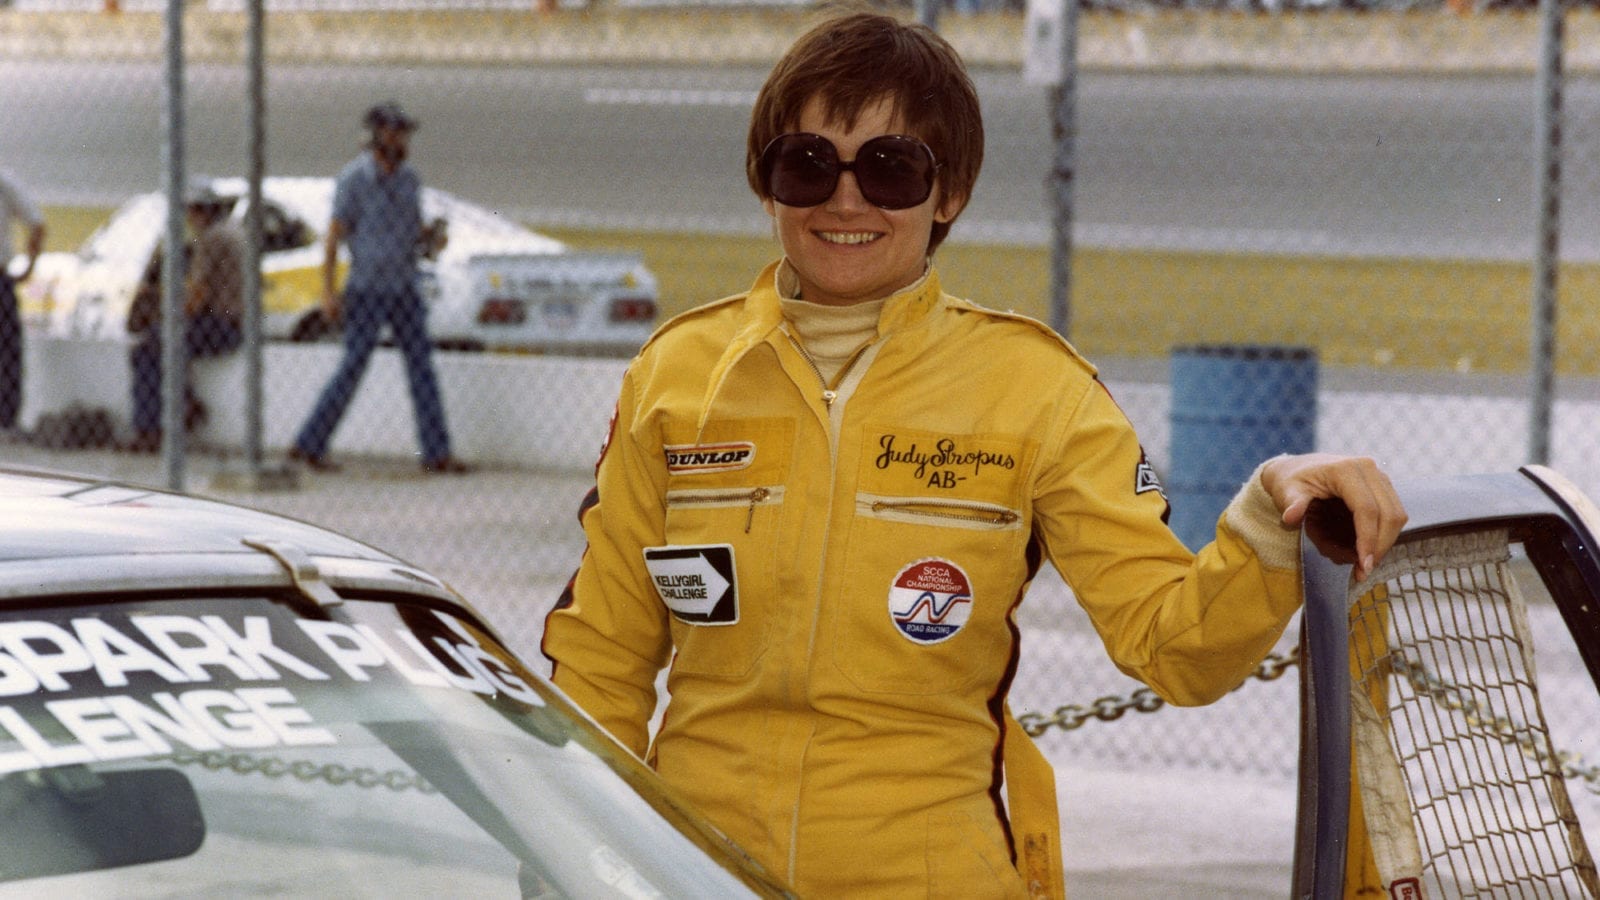 DAYTONA BEACH, FL - 1979: Judy Stropus poses with her Champion Spark Plug Challenge car at Daytona International Speedway. Stropus was considered a top professional at race timing and scoring and worked with many teams including Roger Penske Racing. She also became involved in motorsports public relations. (Photo by ISC Images & Archives via Getty Images)